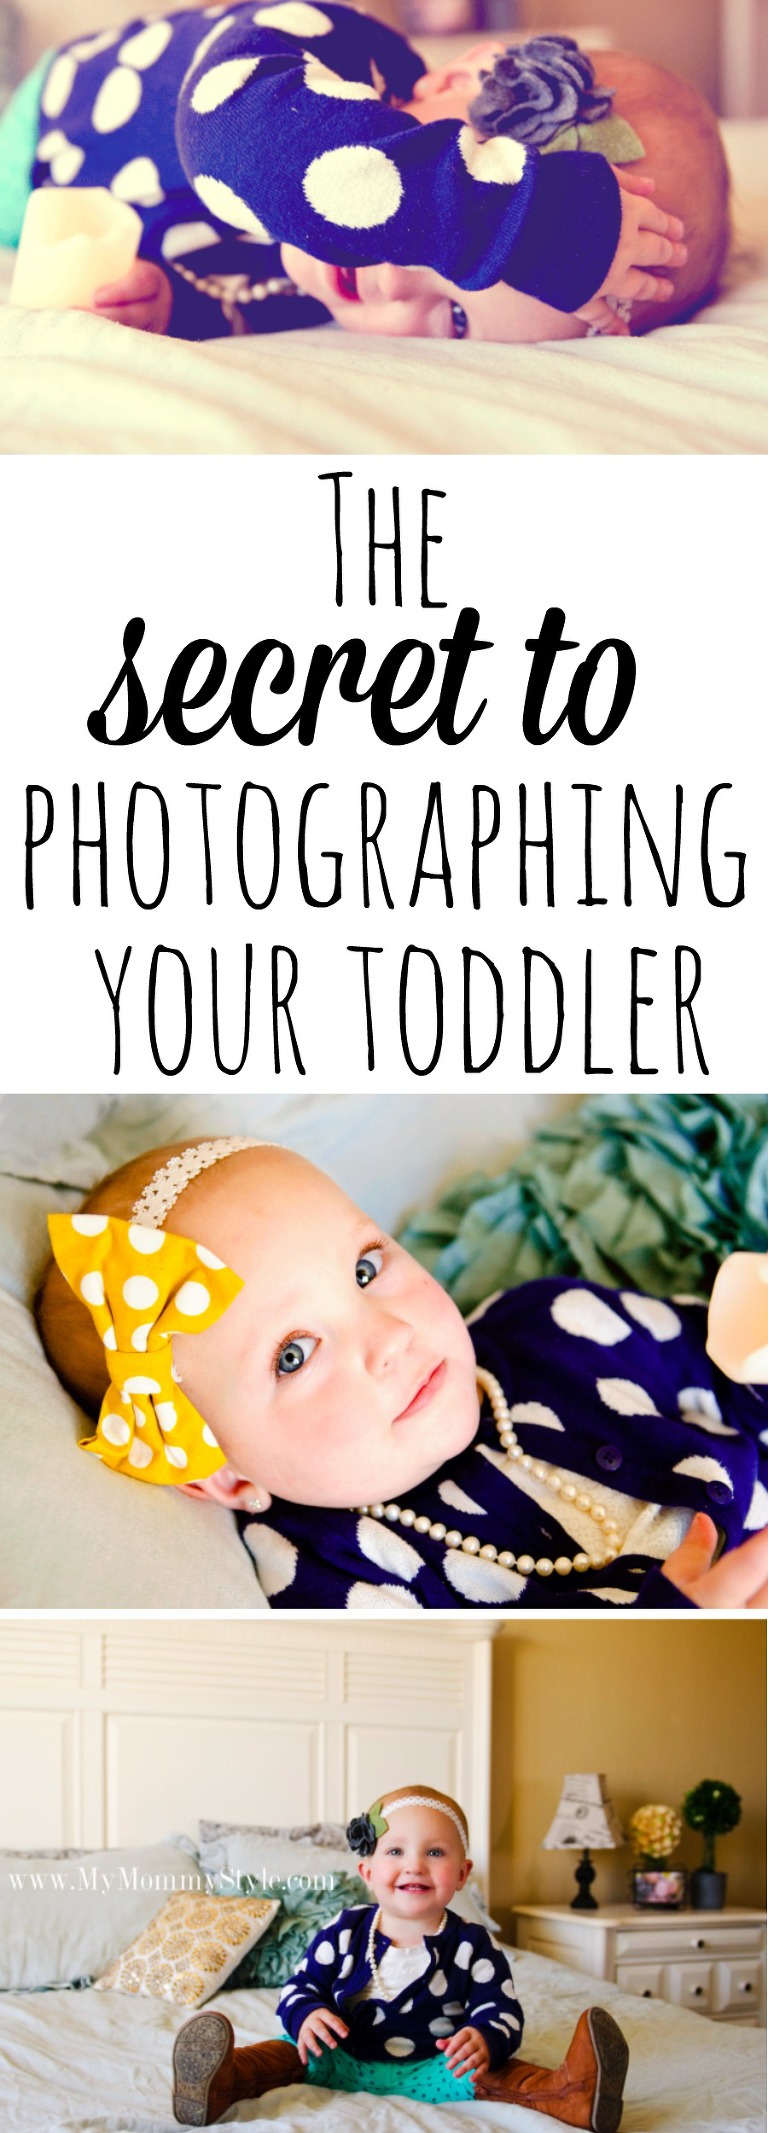 the-secret-to-photographing-your-toddler-2